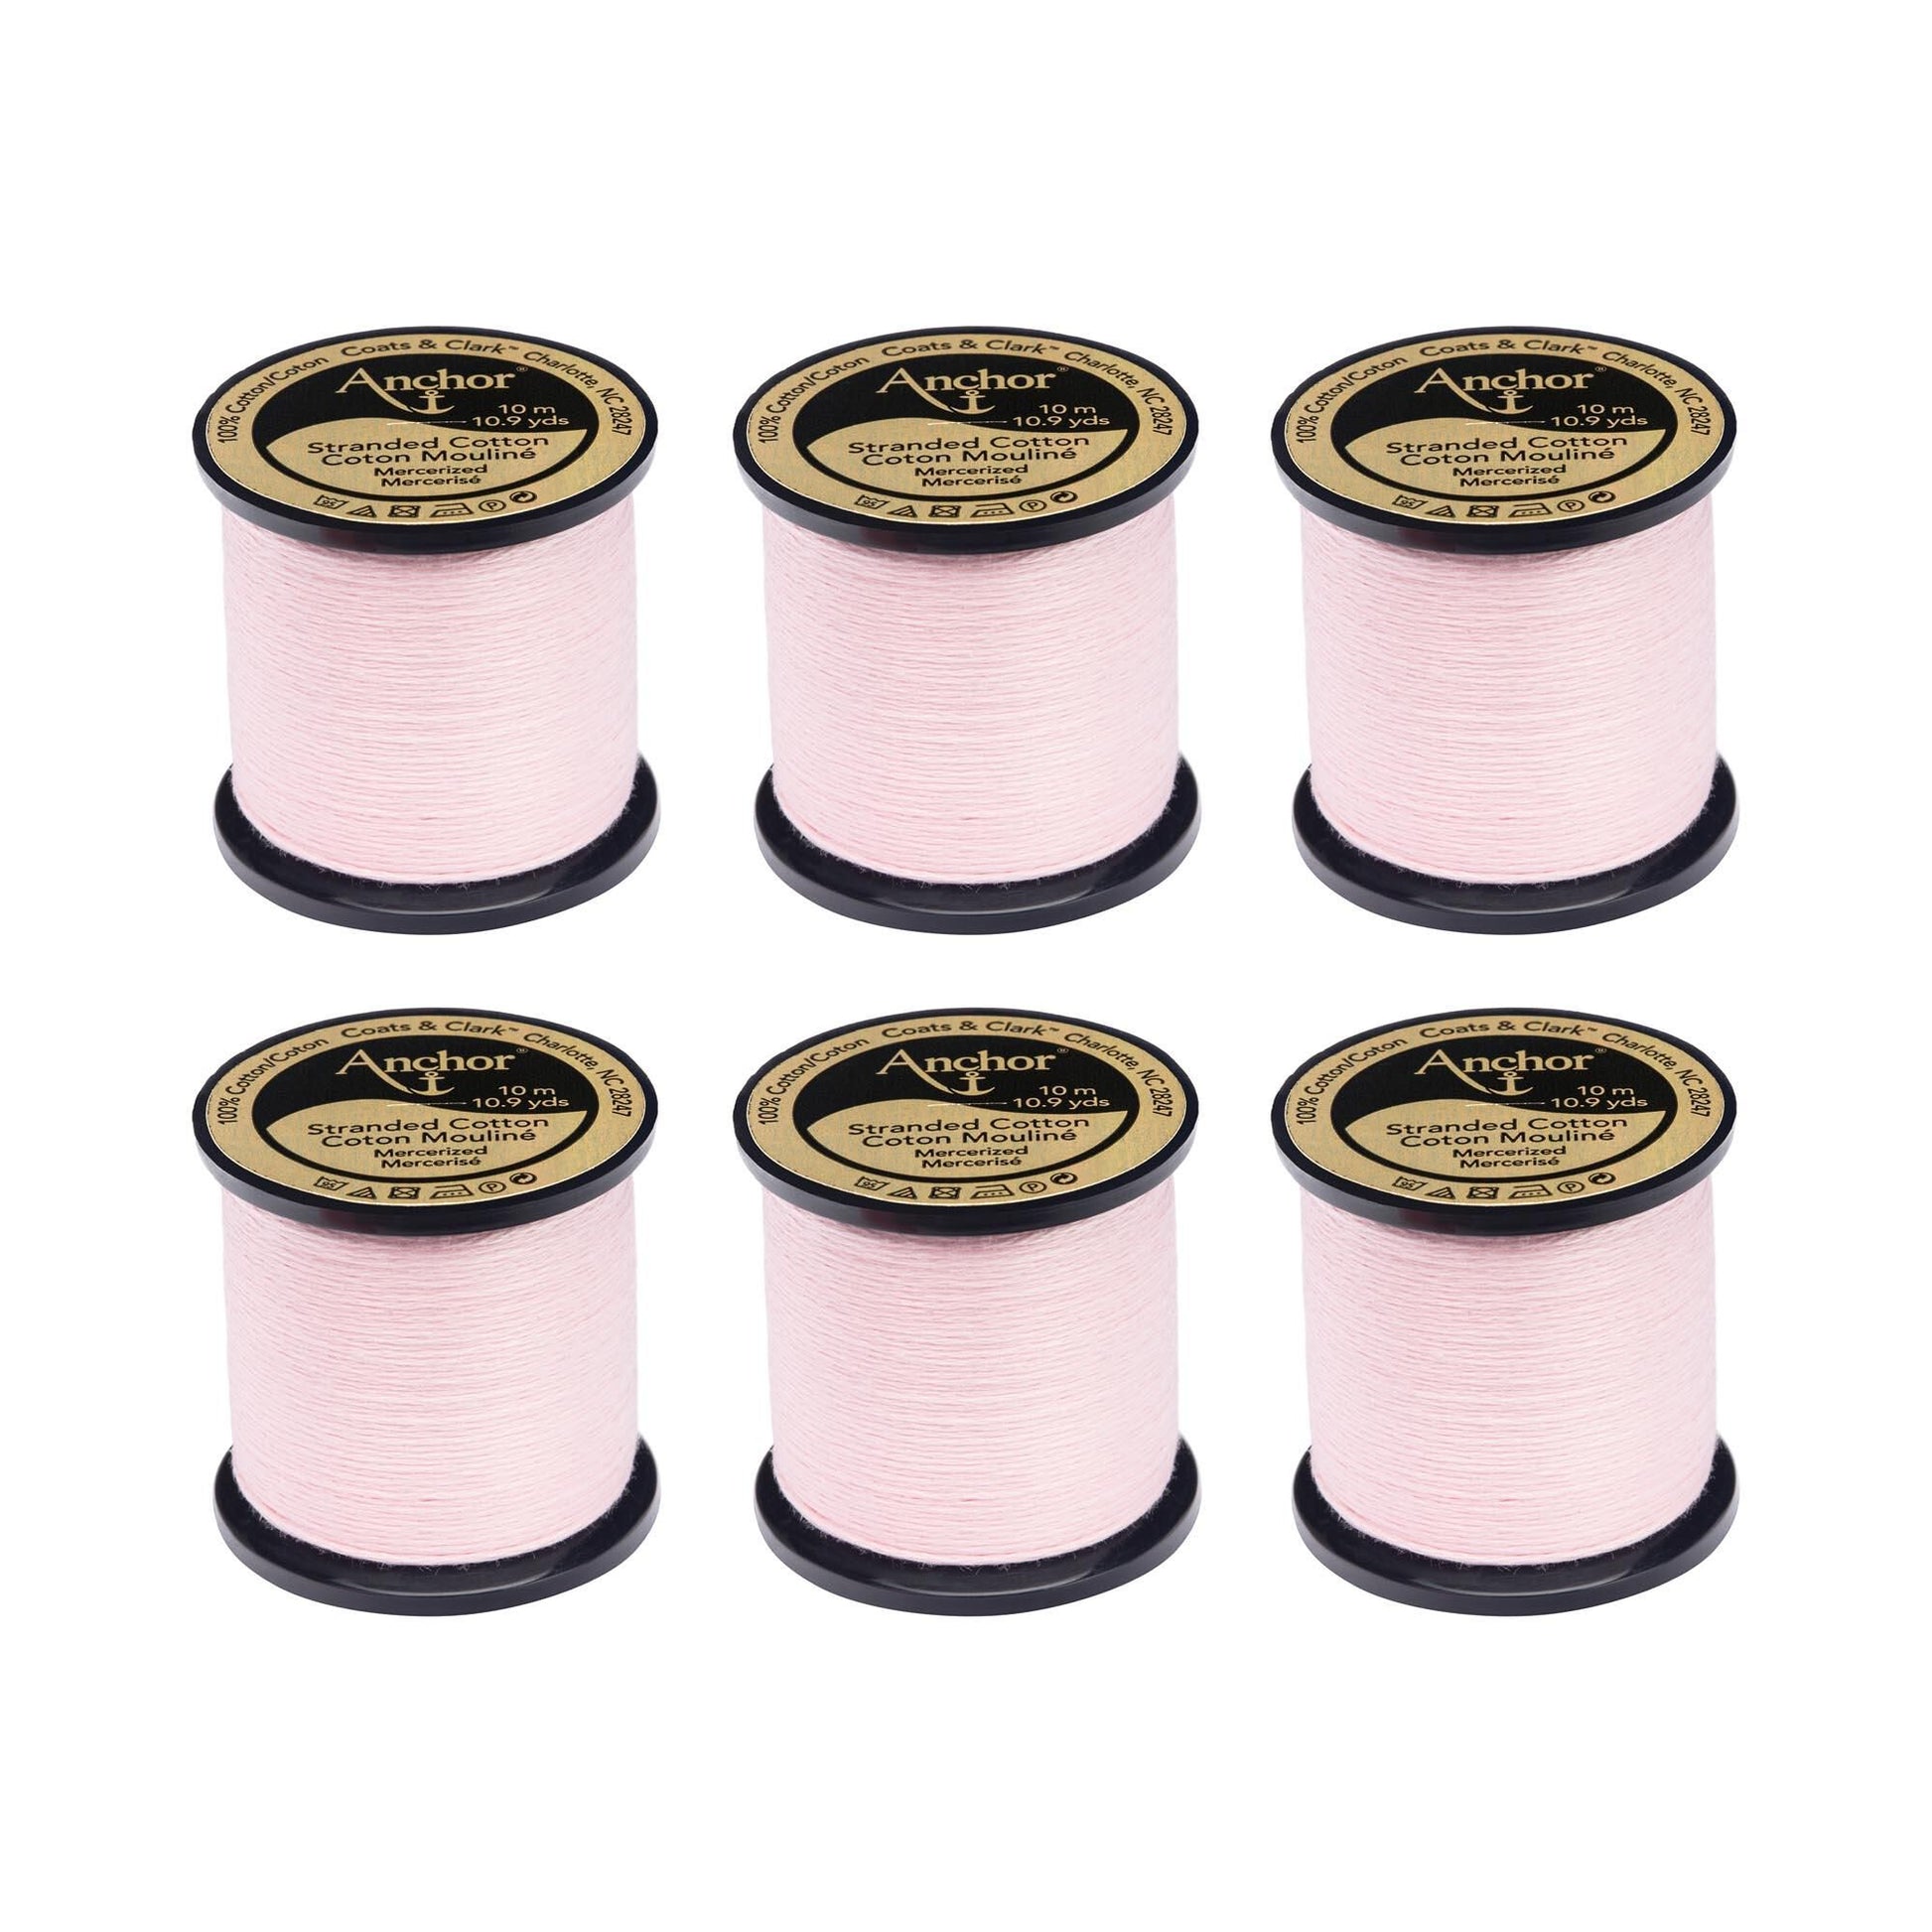 Anchor Spooled Floss 10 Meters (6 Pack) 0048 China Rose Very Light